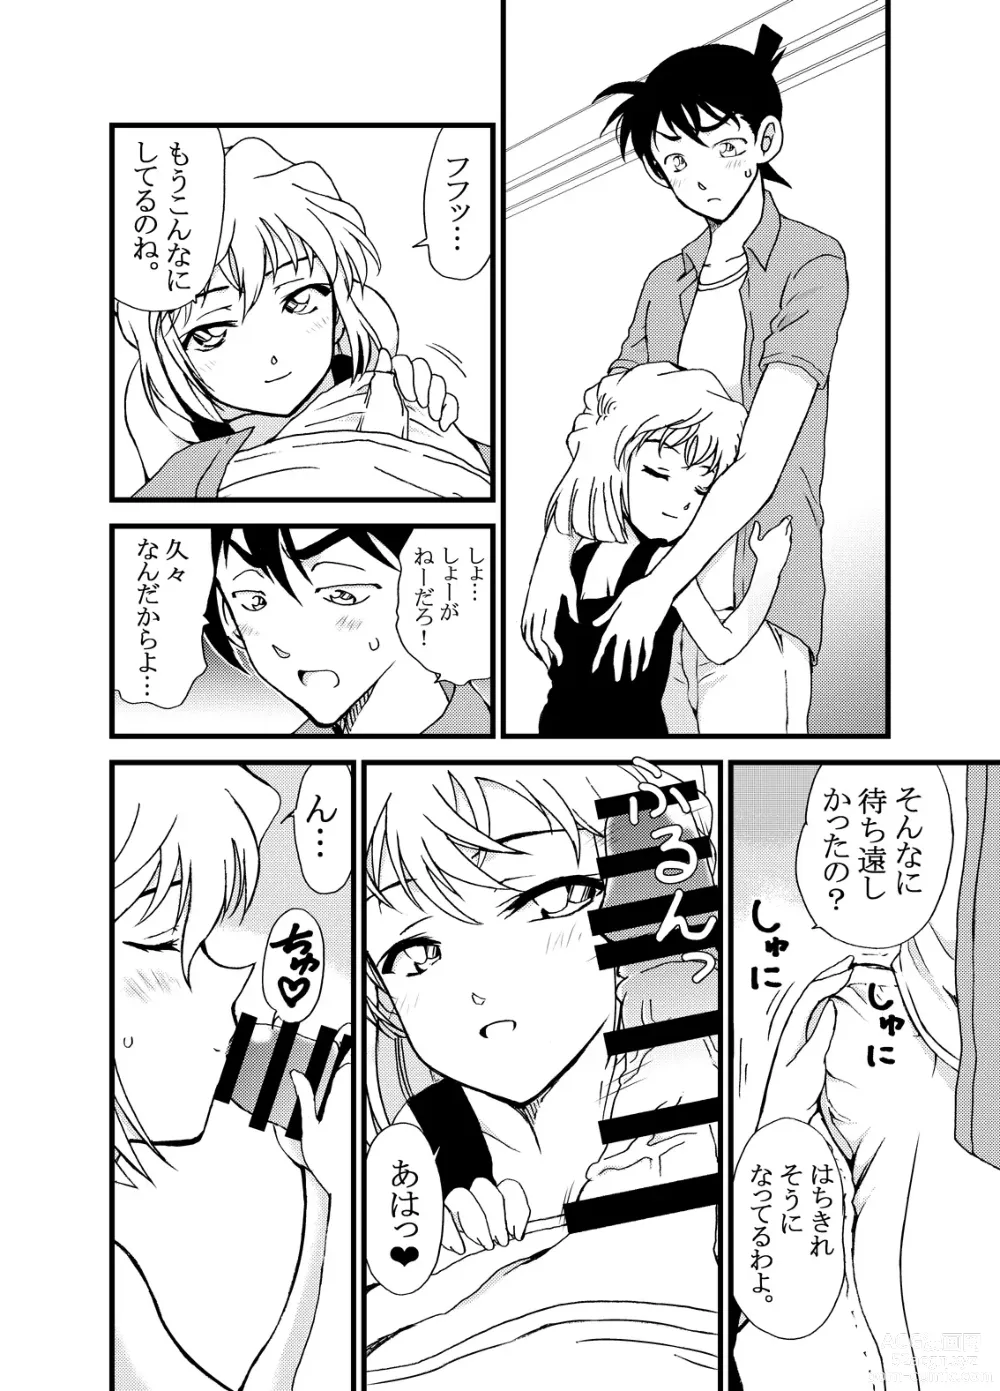 Page 7 of doujinshi Summer Resort Preview